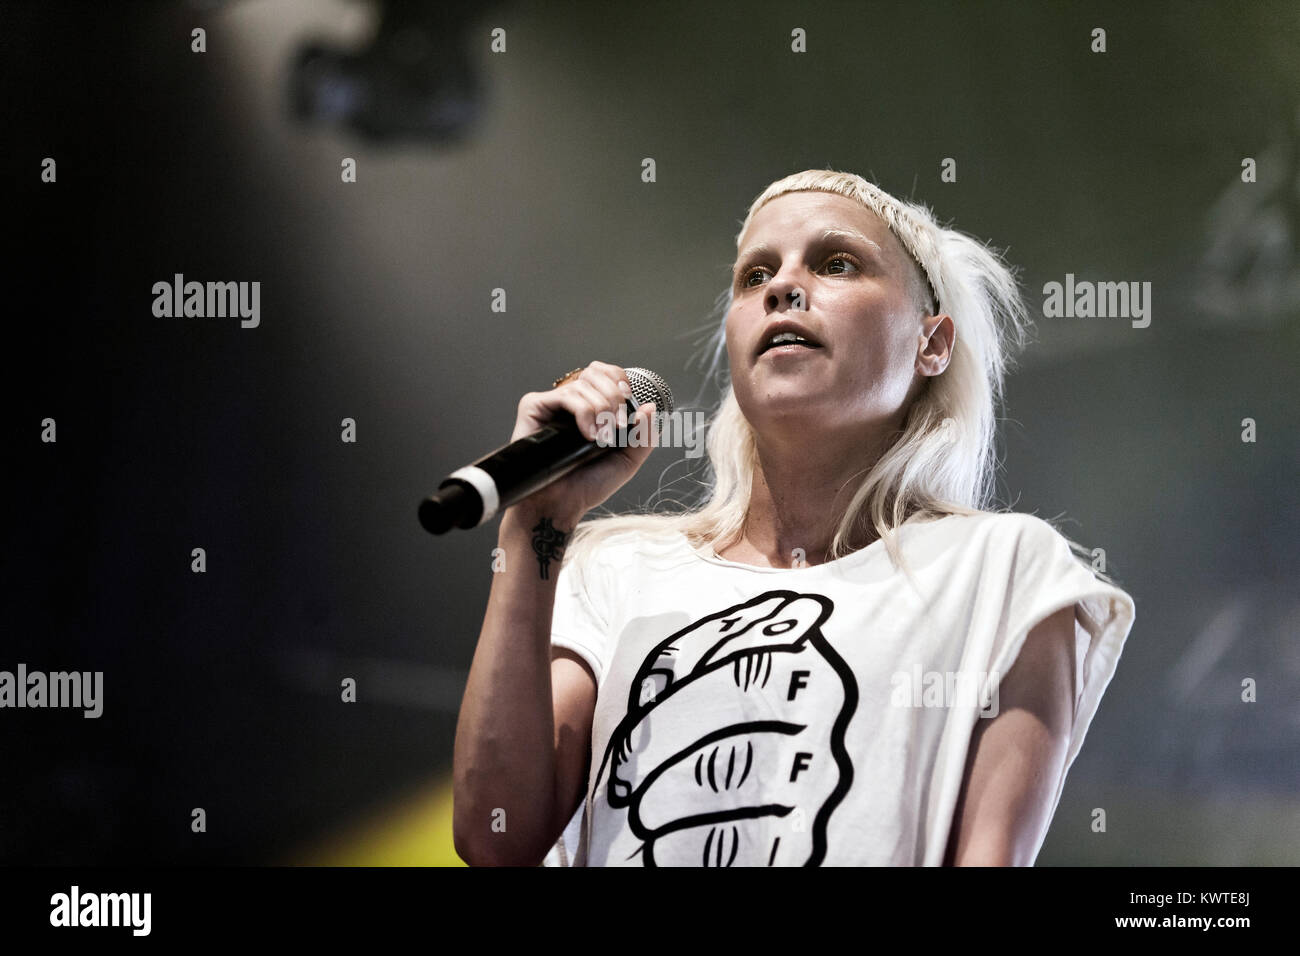 The South African rap duo Die Antwoord performs a live concert at Roskilde Festival 2010. The band consists of the two rave-vocalist Ninja and Yo-Landi Vi$$er (pictured) who perform lyrics in Afrikaans, Xhosa and English. Denmark, 04/07 2010. Stock Photo